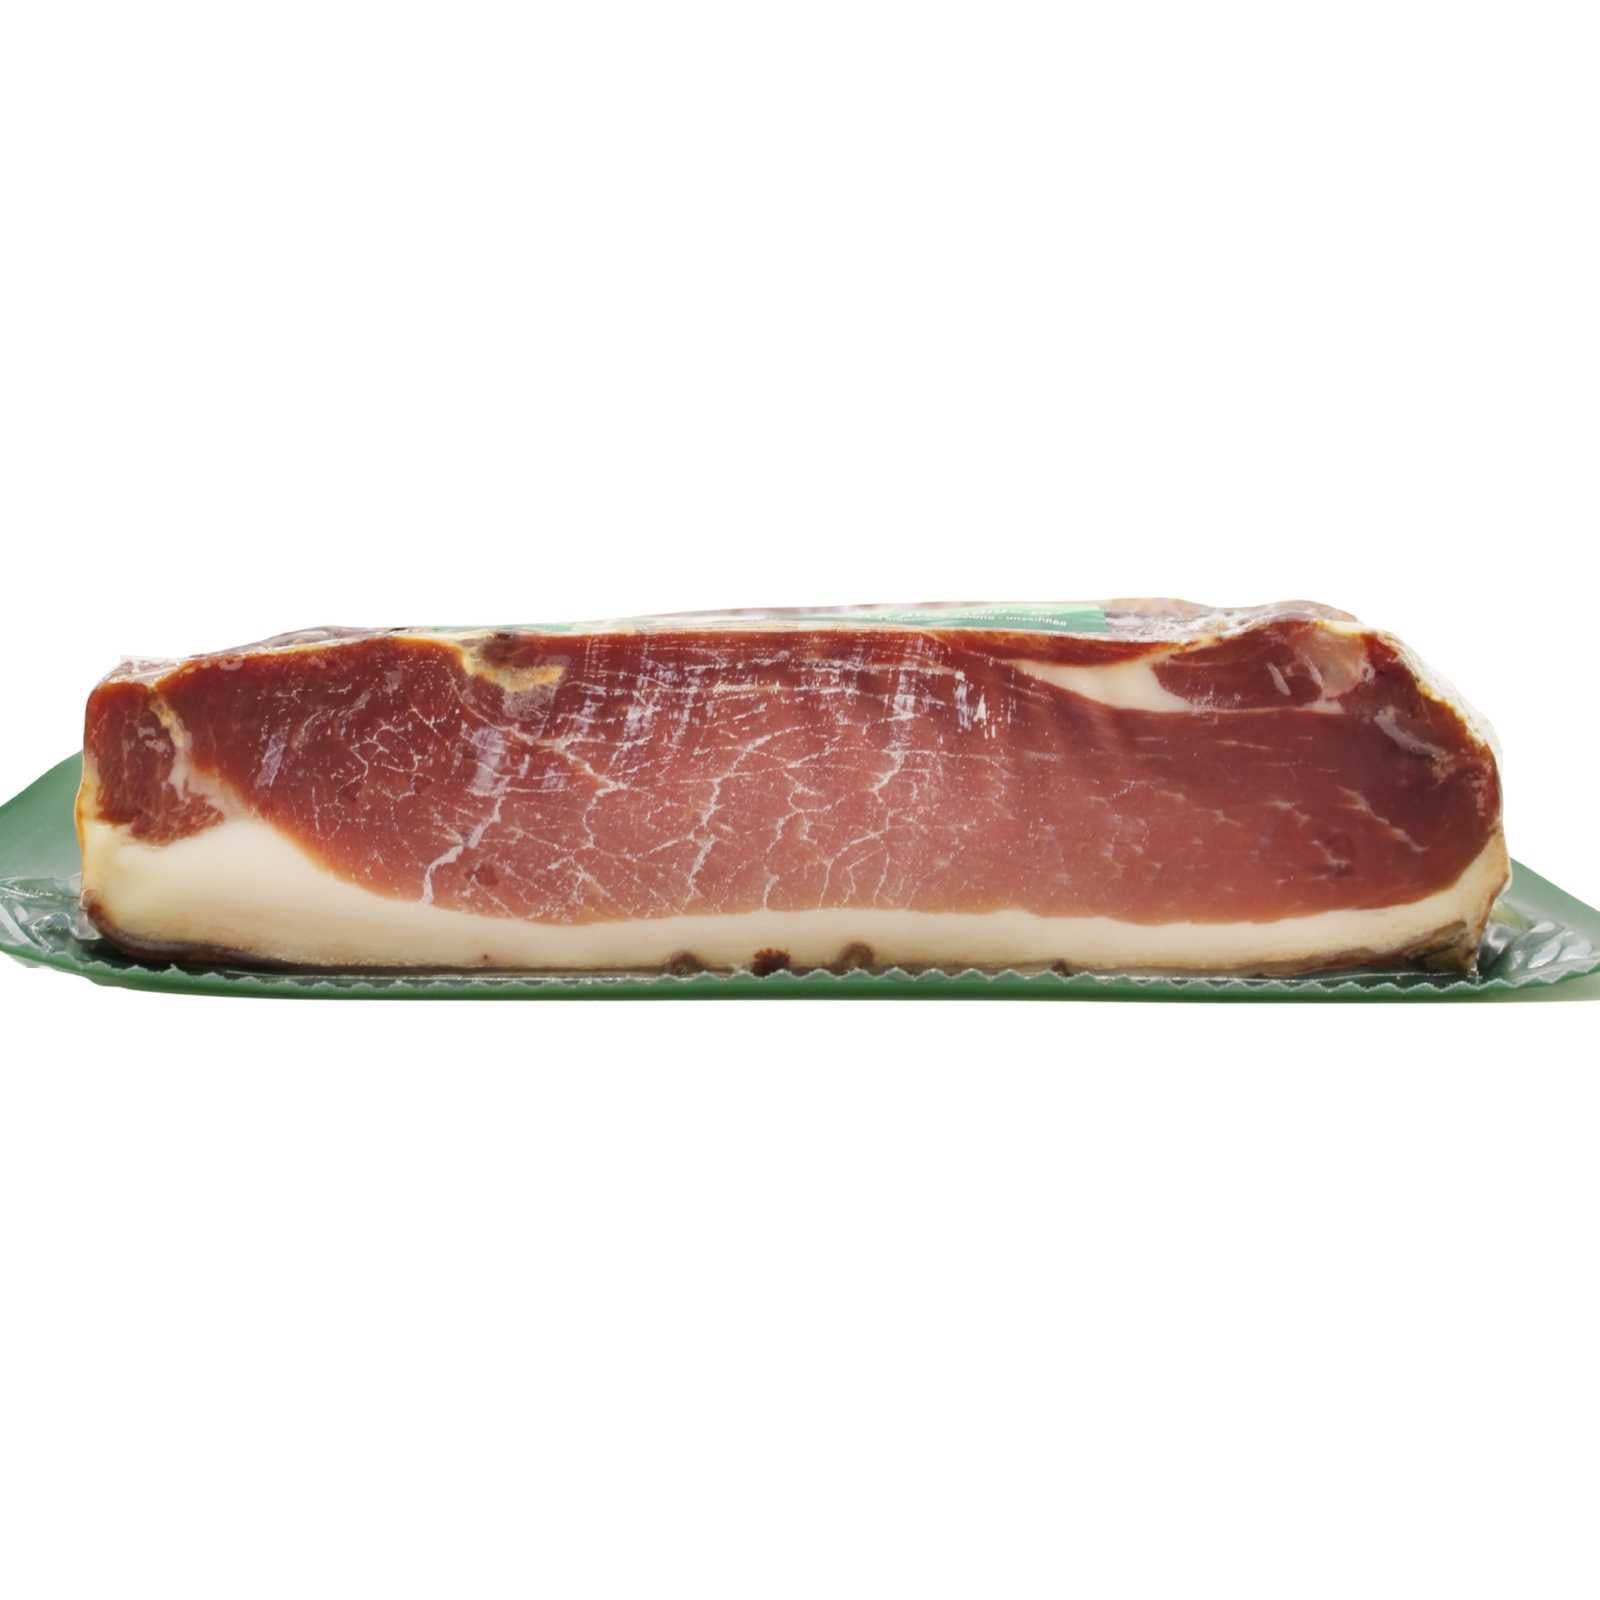 SPECK | Smoked Cured Ham - Prosciutto | Weight approx. 5 lbs | by Moser brand Side